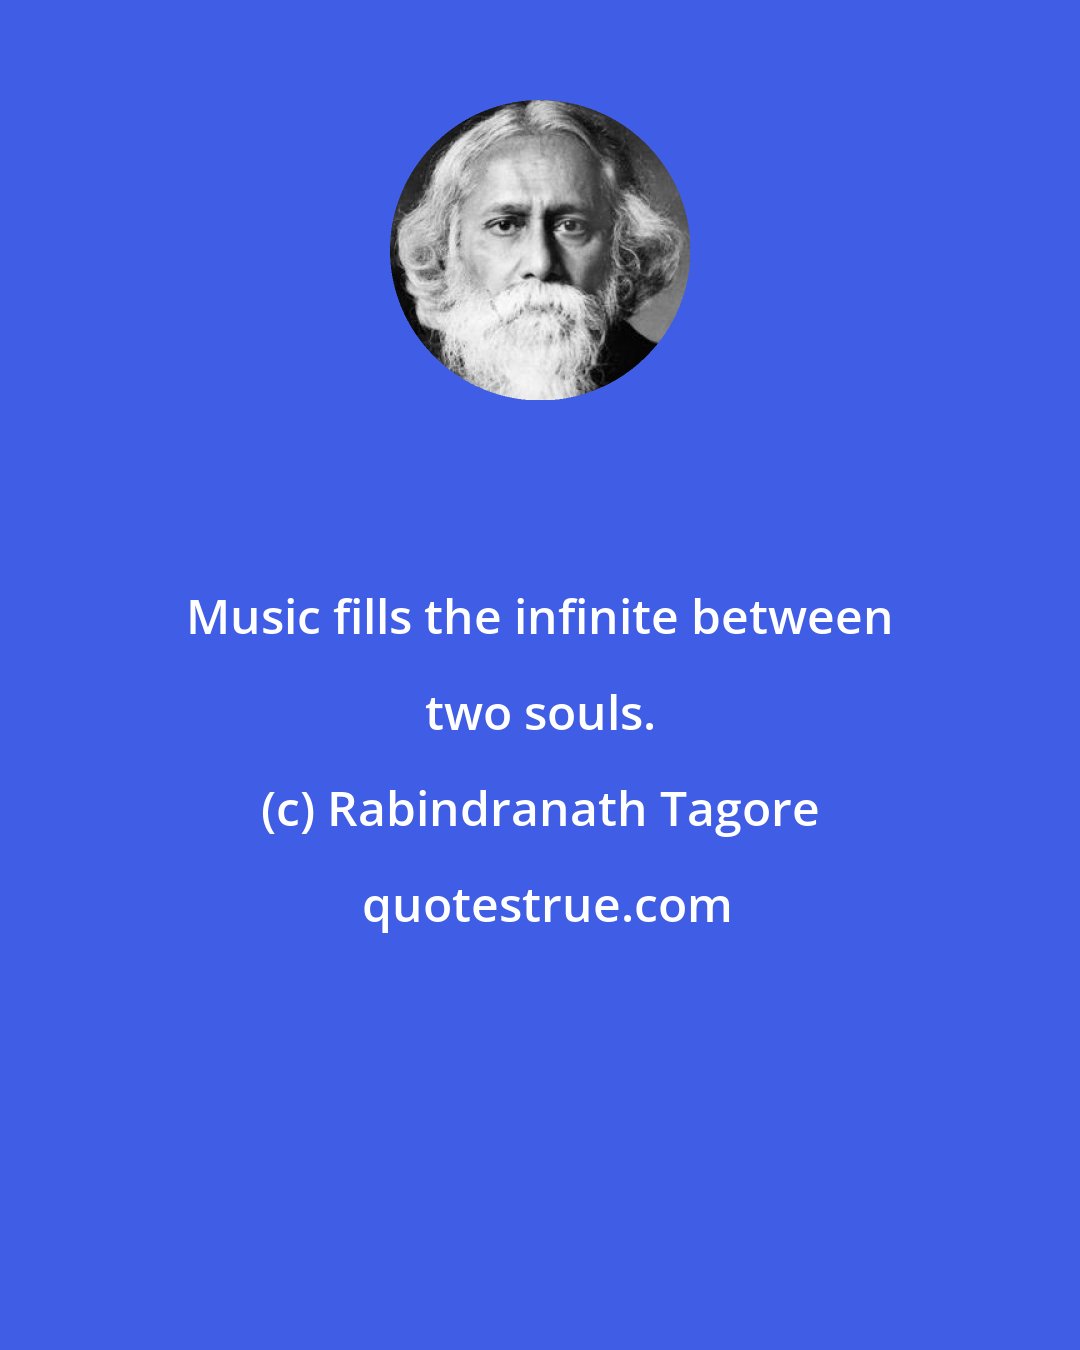 Rabindranath Tagore: Music fills the infinite between two souls.